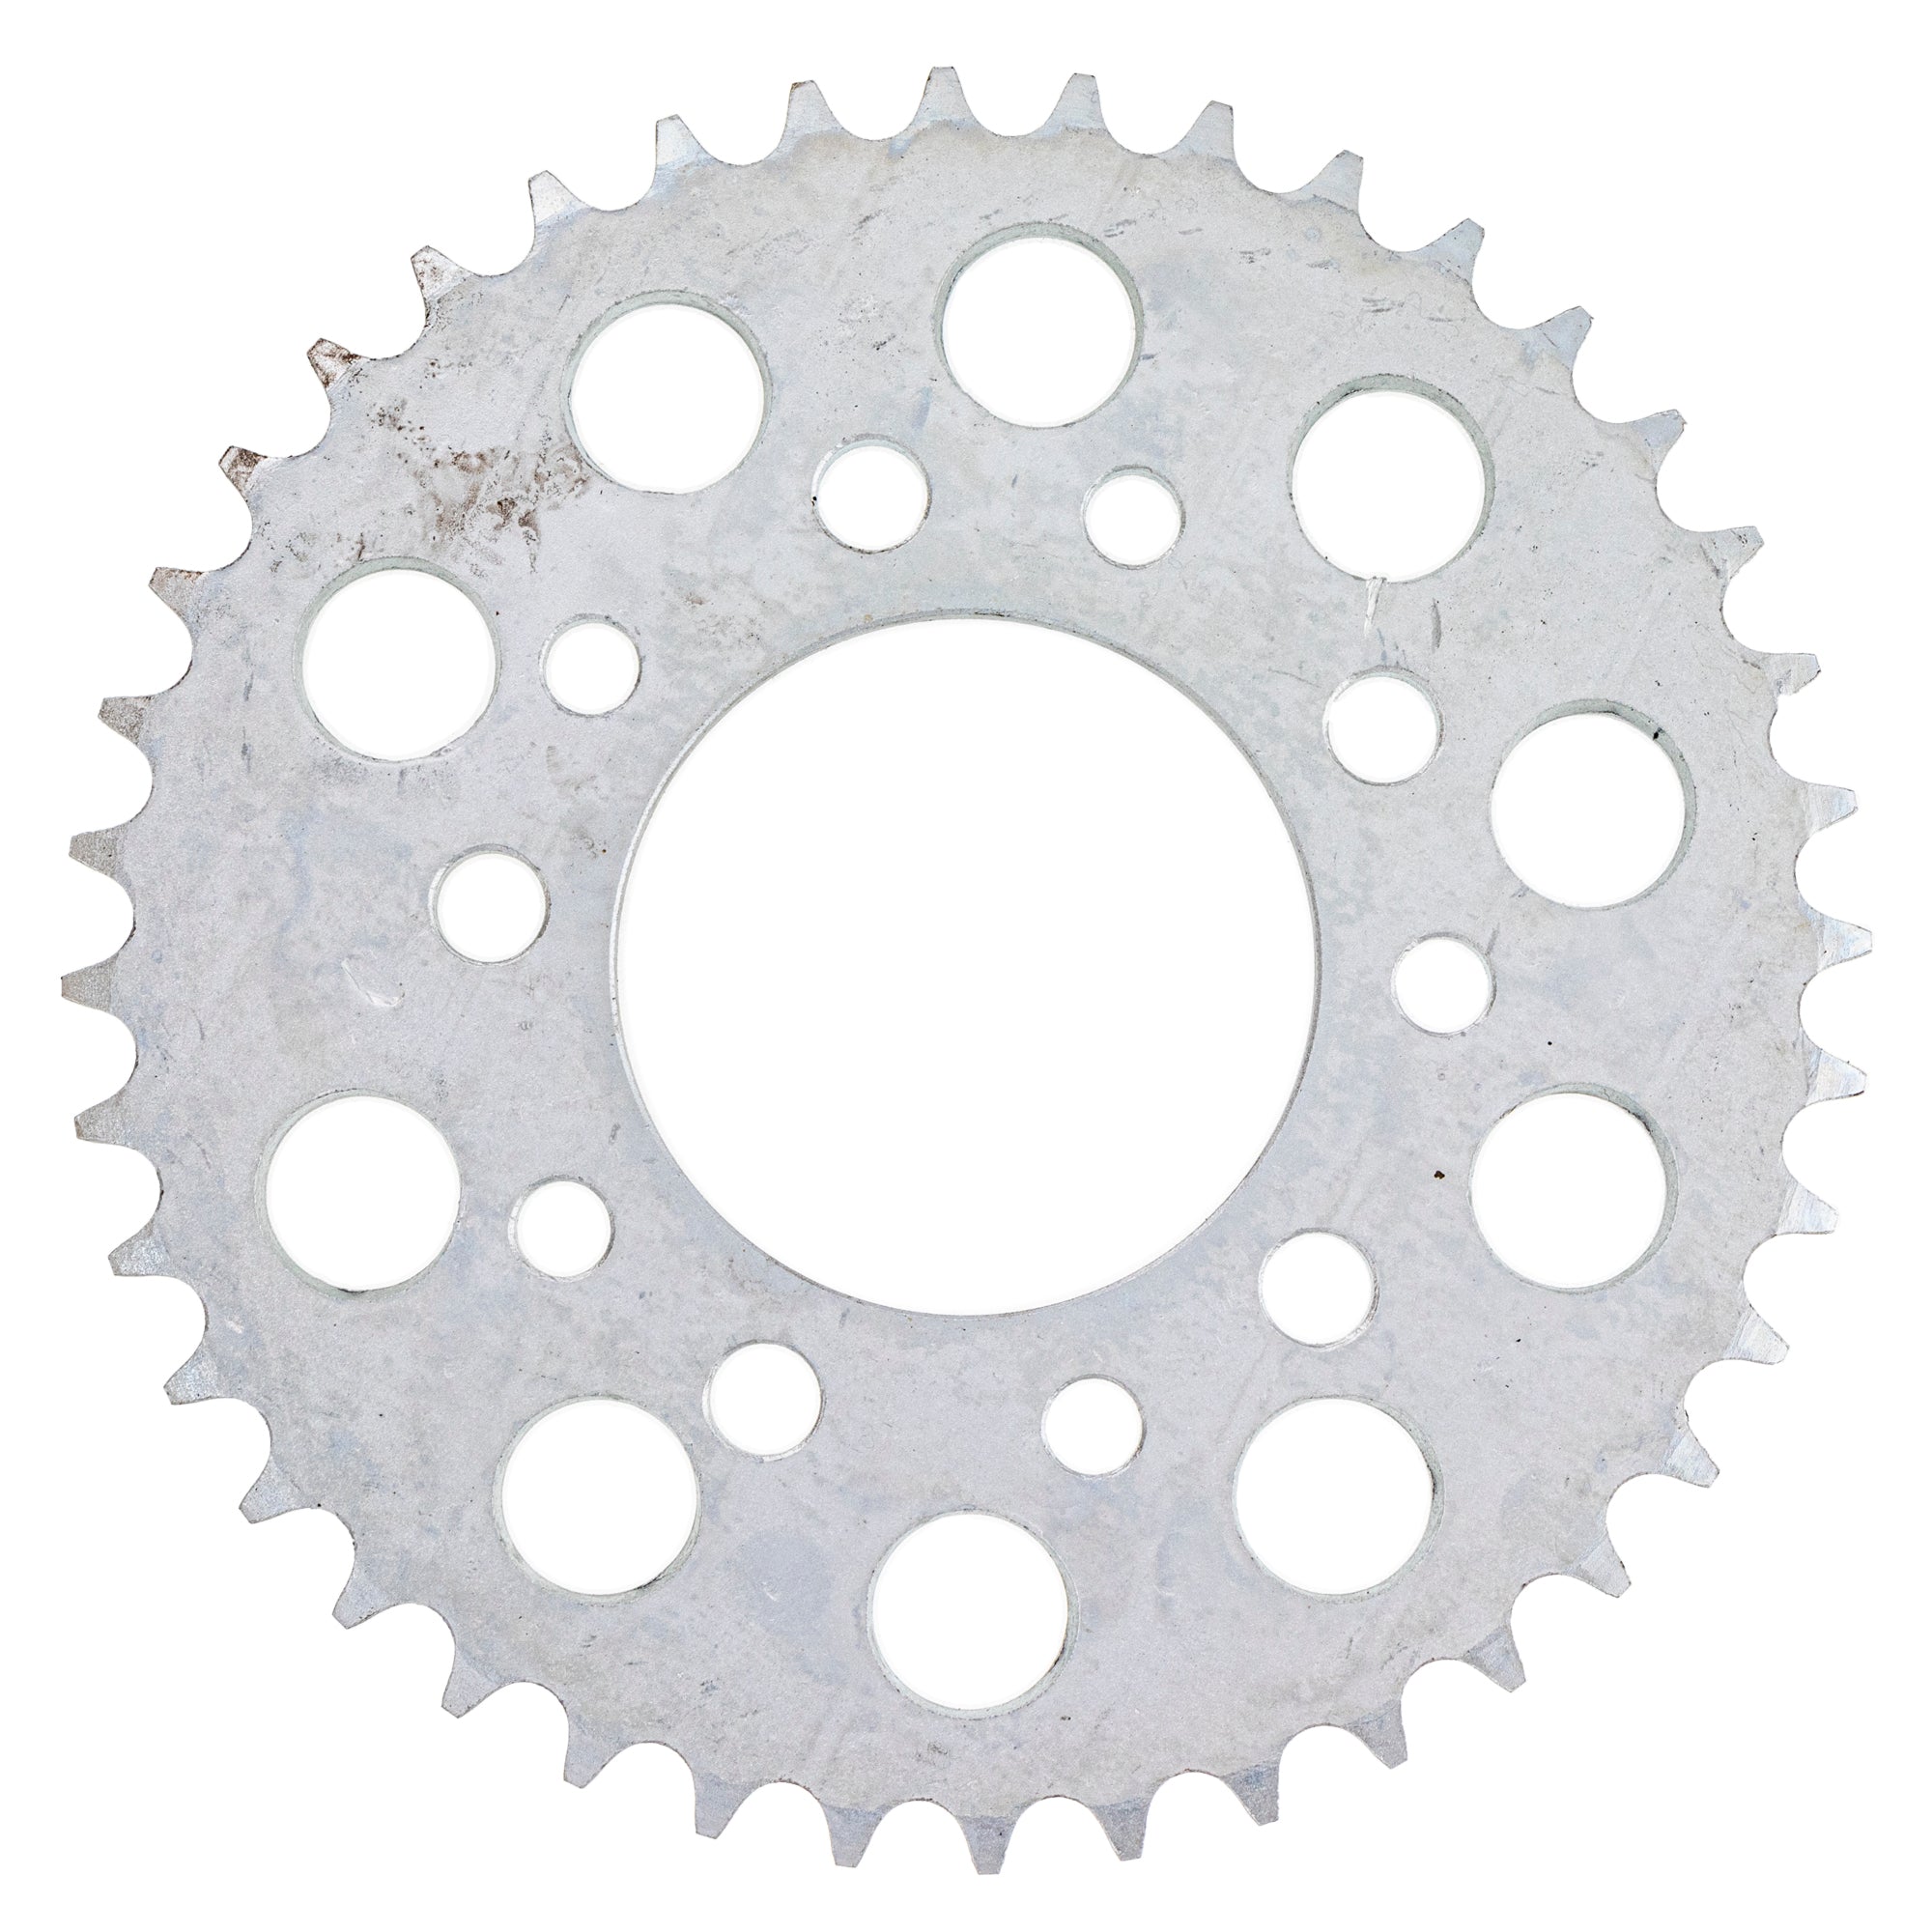 525 Pitch Front 15T Rear 40T Drive Sprocket Kit for Honda CB750